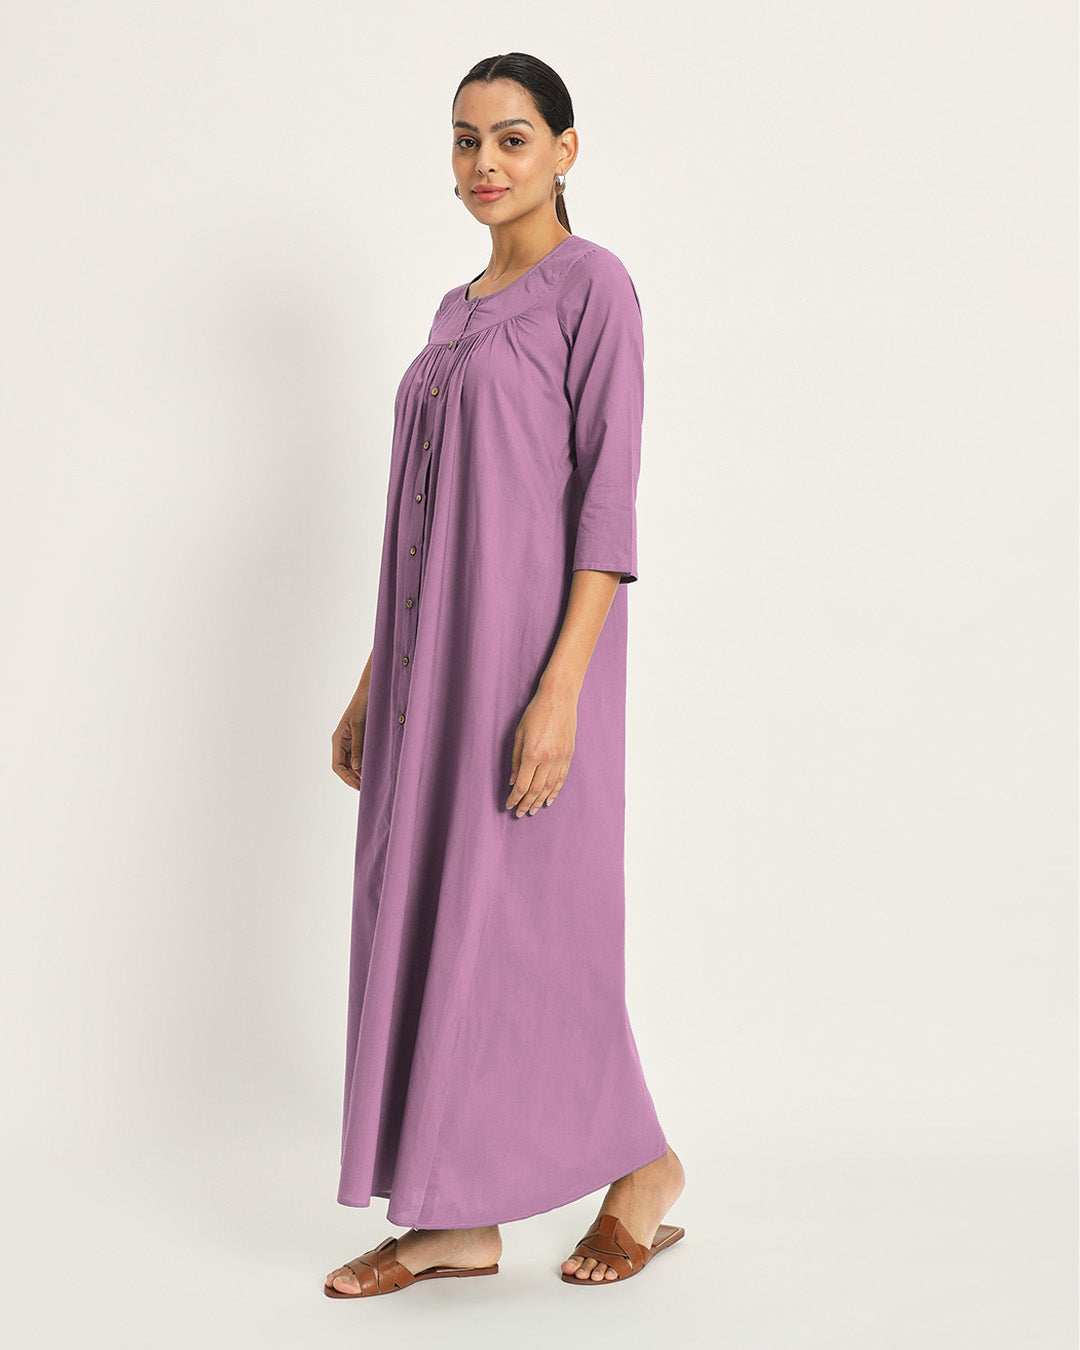 Combo: Iris Pink & Russet Red Nighttime Must-Have Nightdress